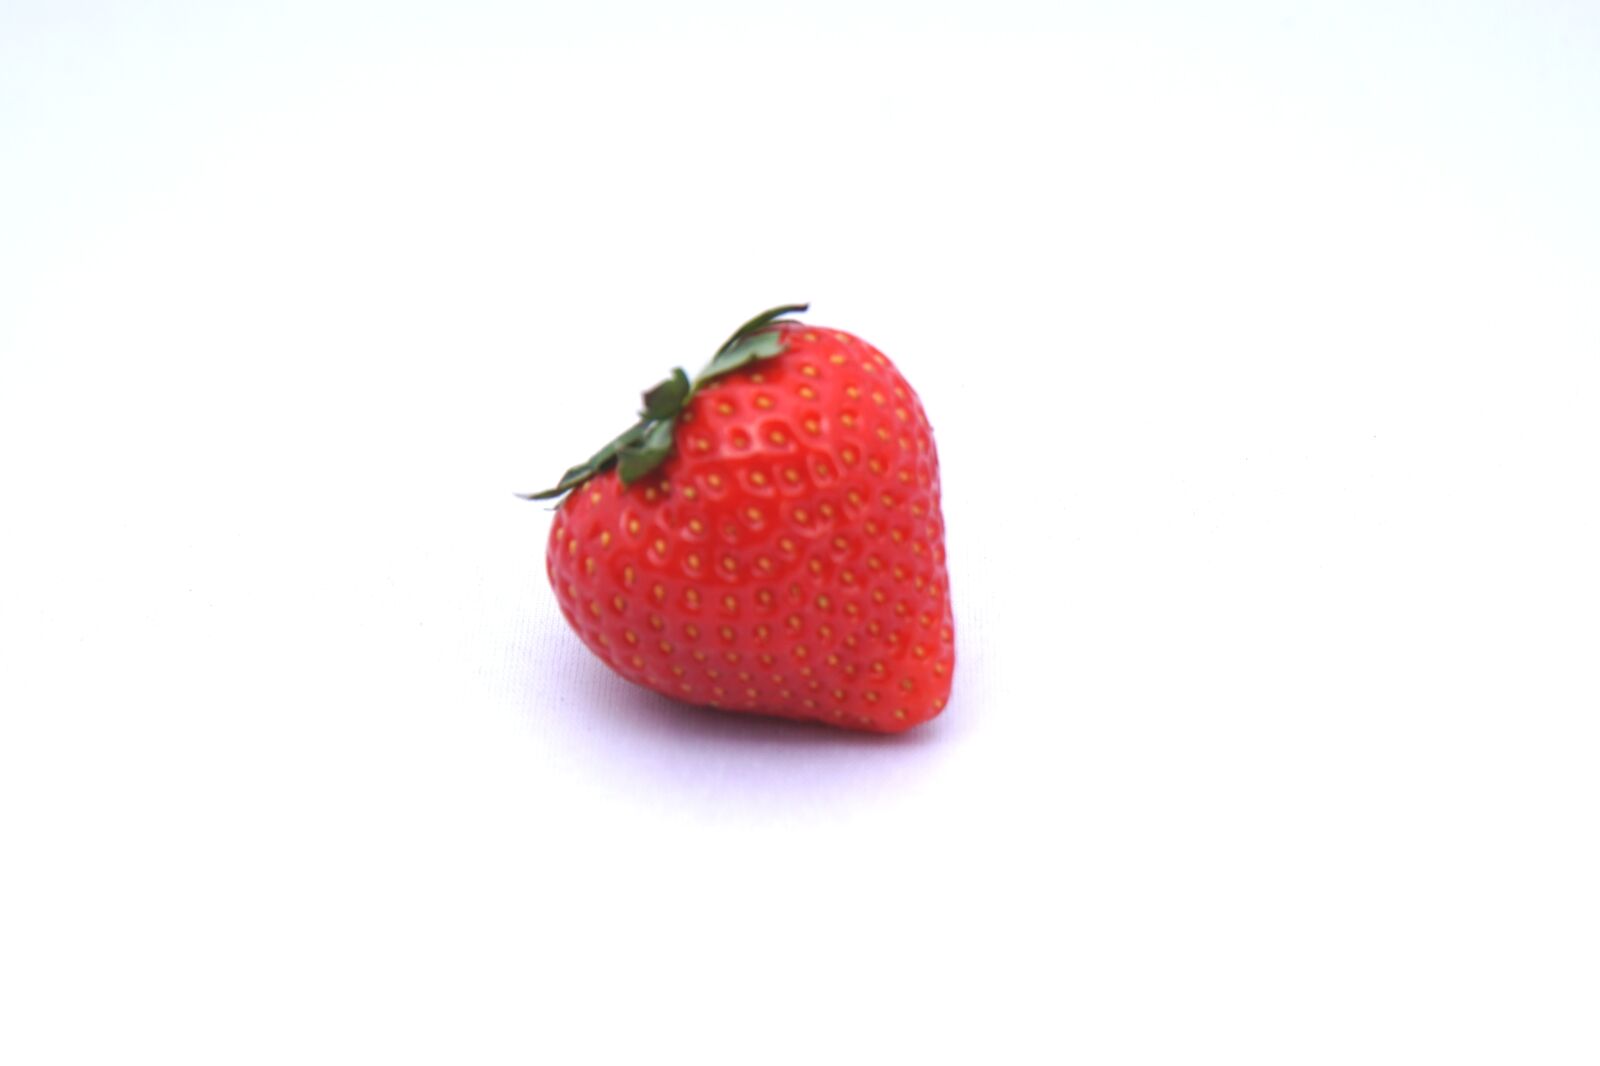 Sony a6000 sample photo. Strawberry, red, strawberries photography